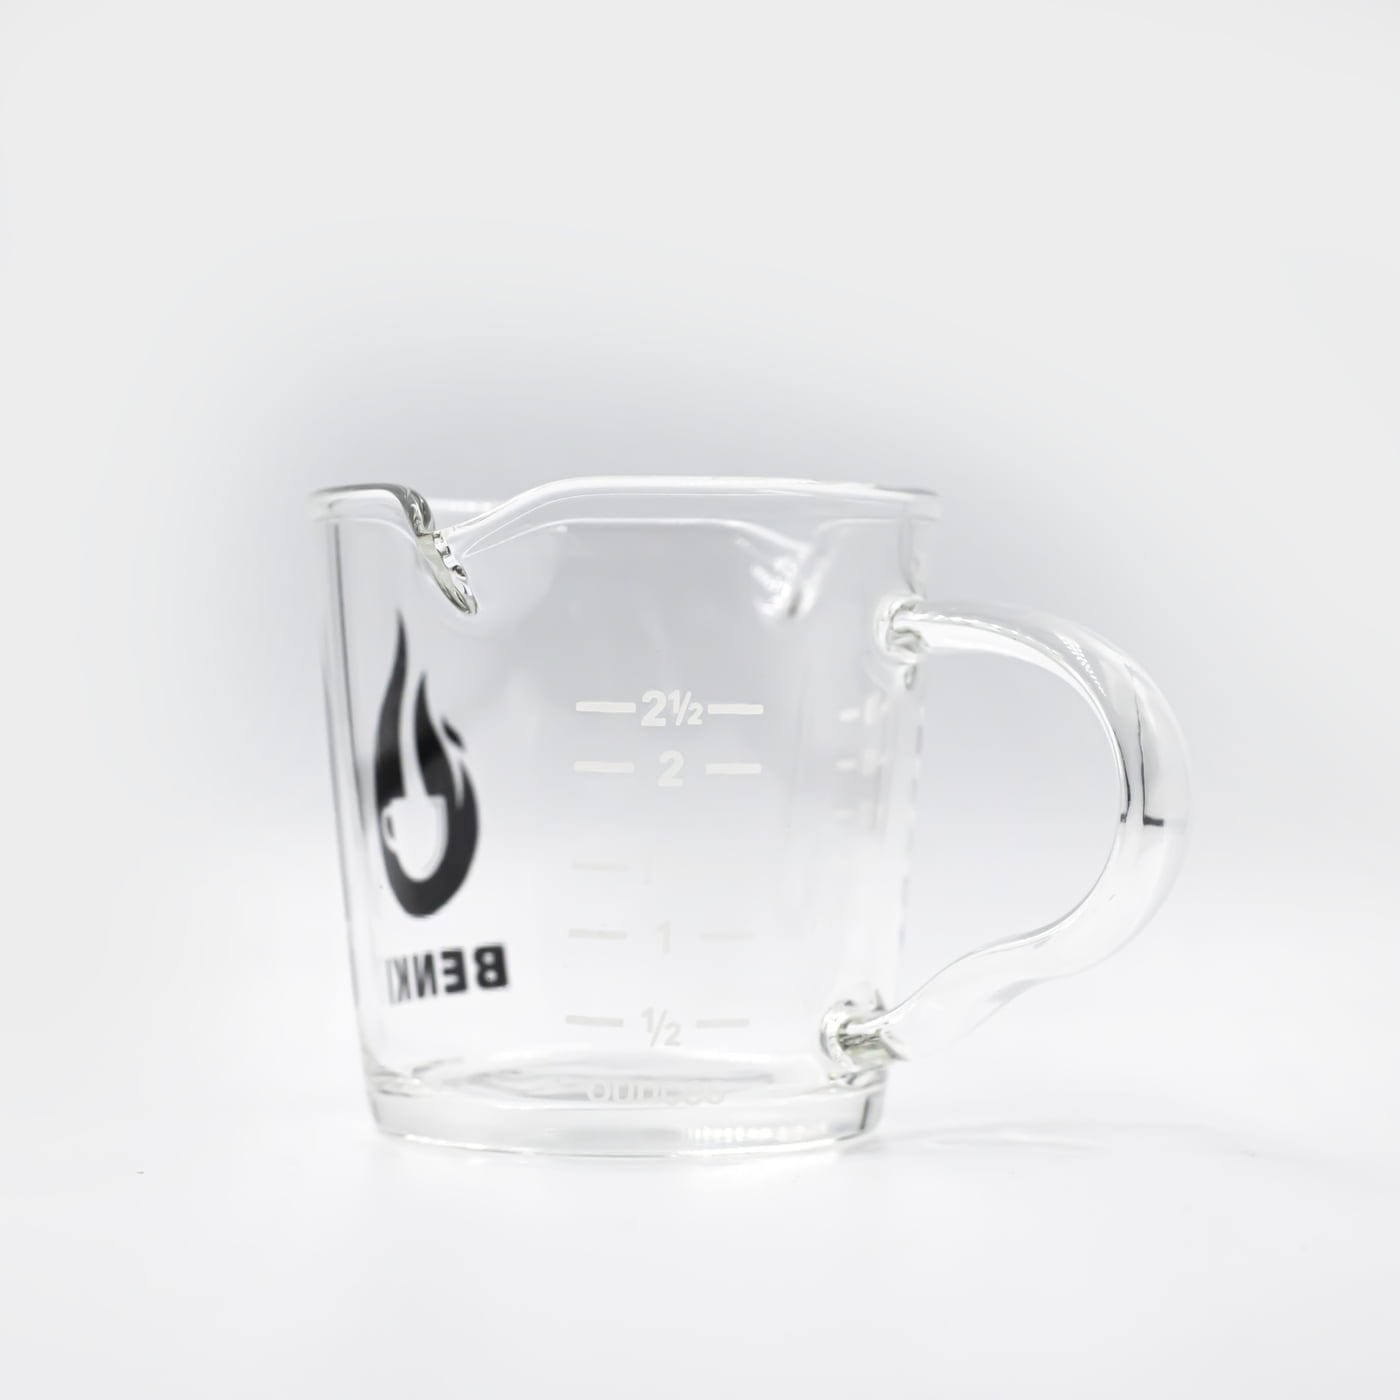 Benki Double Spout Shot Glass - Premium Coffee Tools from BENKI - Just Dhs. 42! Shop now at Liwa Coffee Roastery